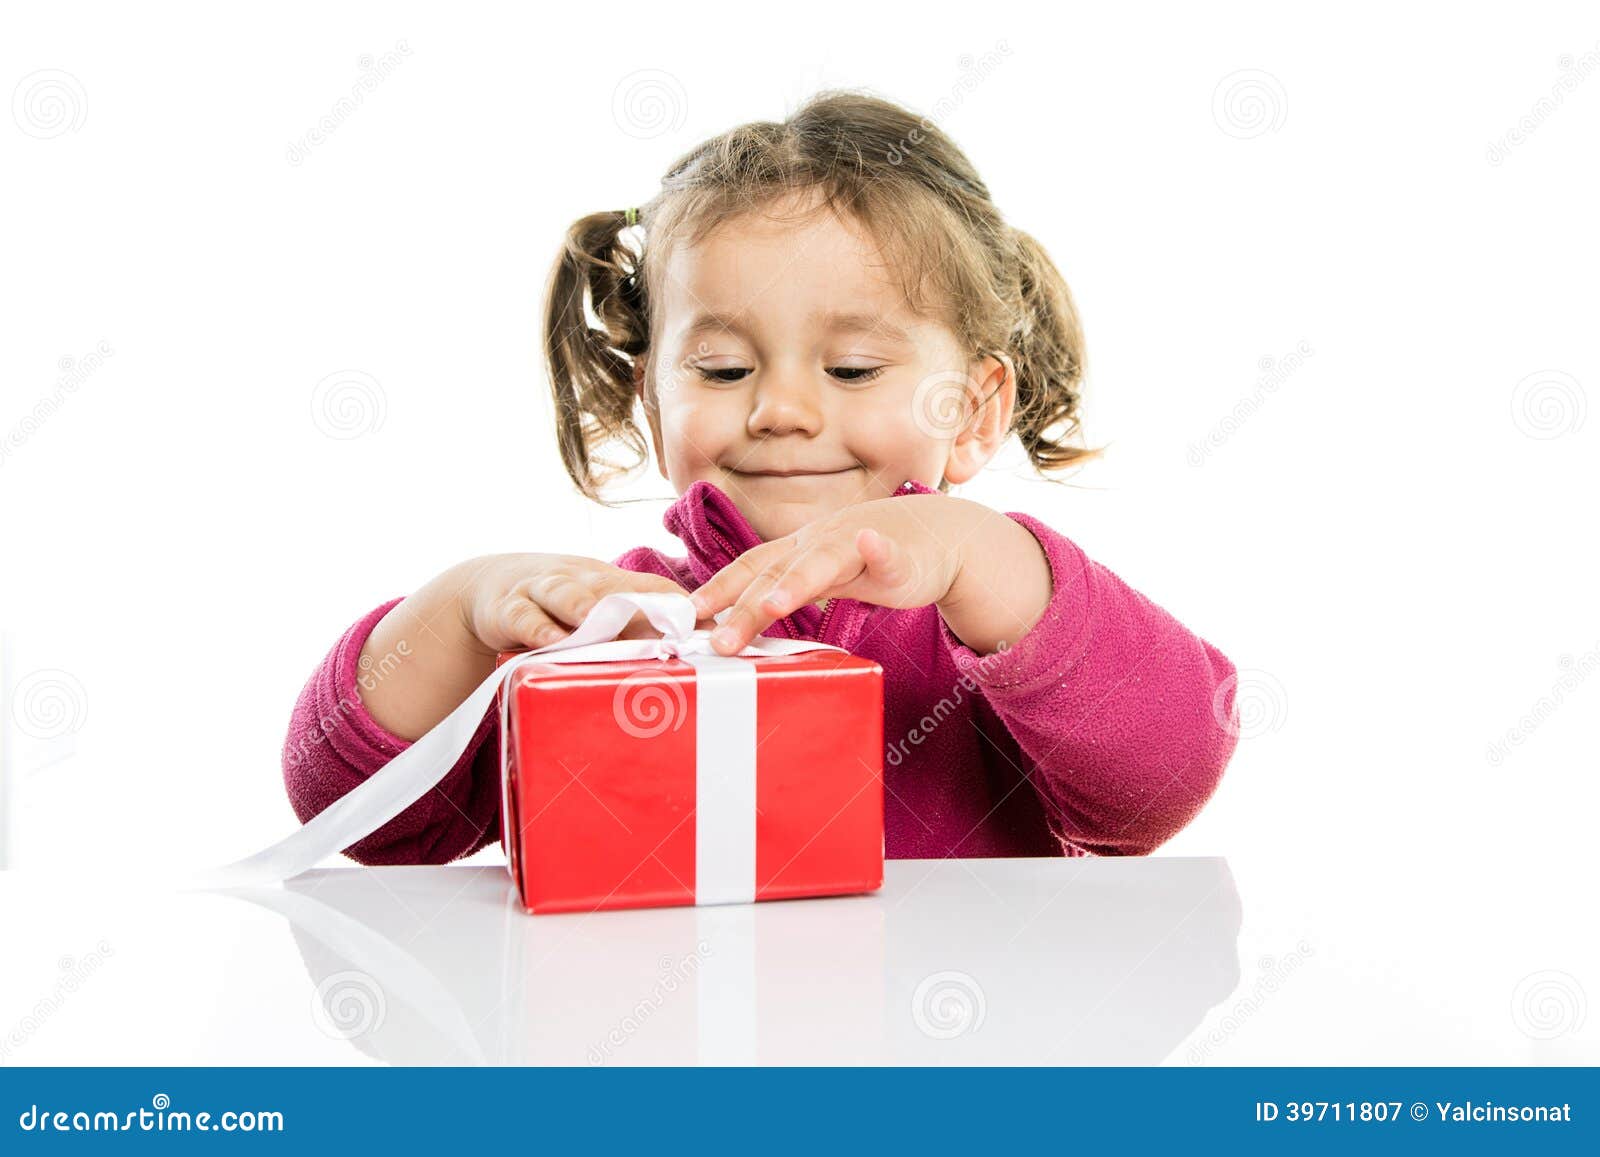 Cute girl stock image. Image of birthday, cheerful, lovely - 39711807